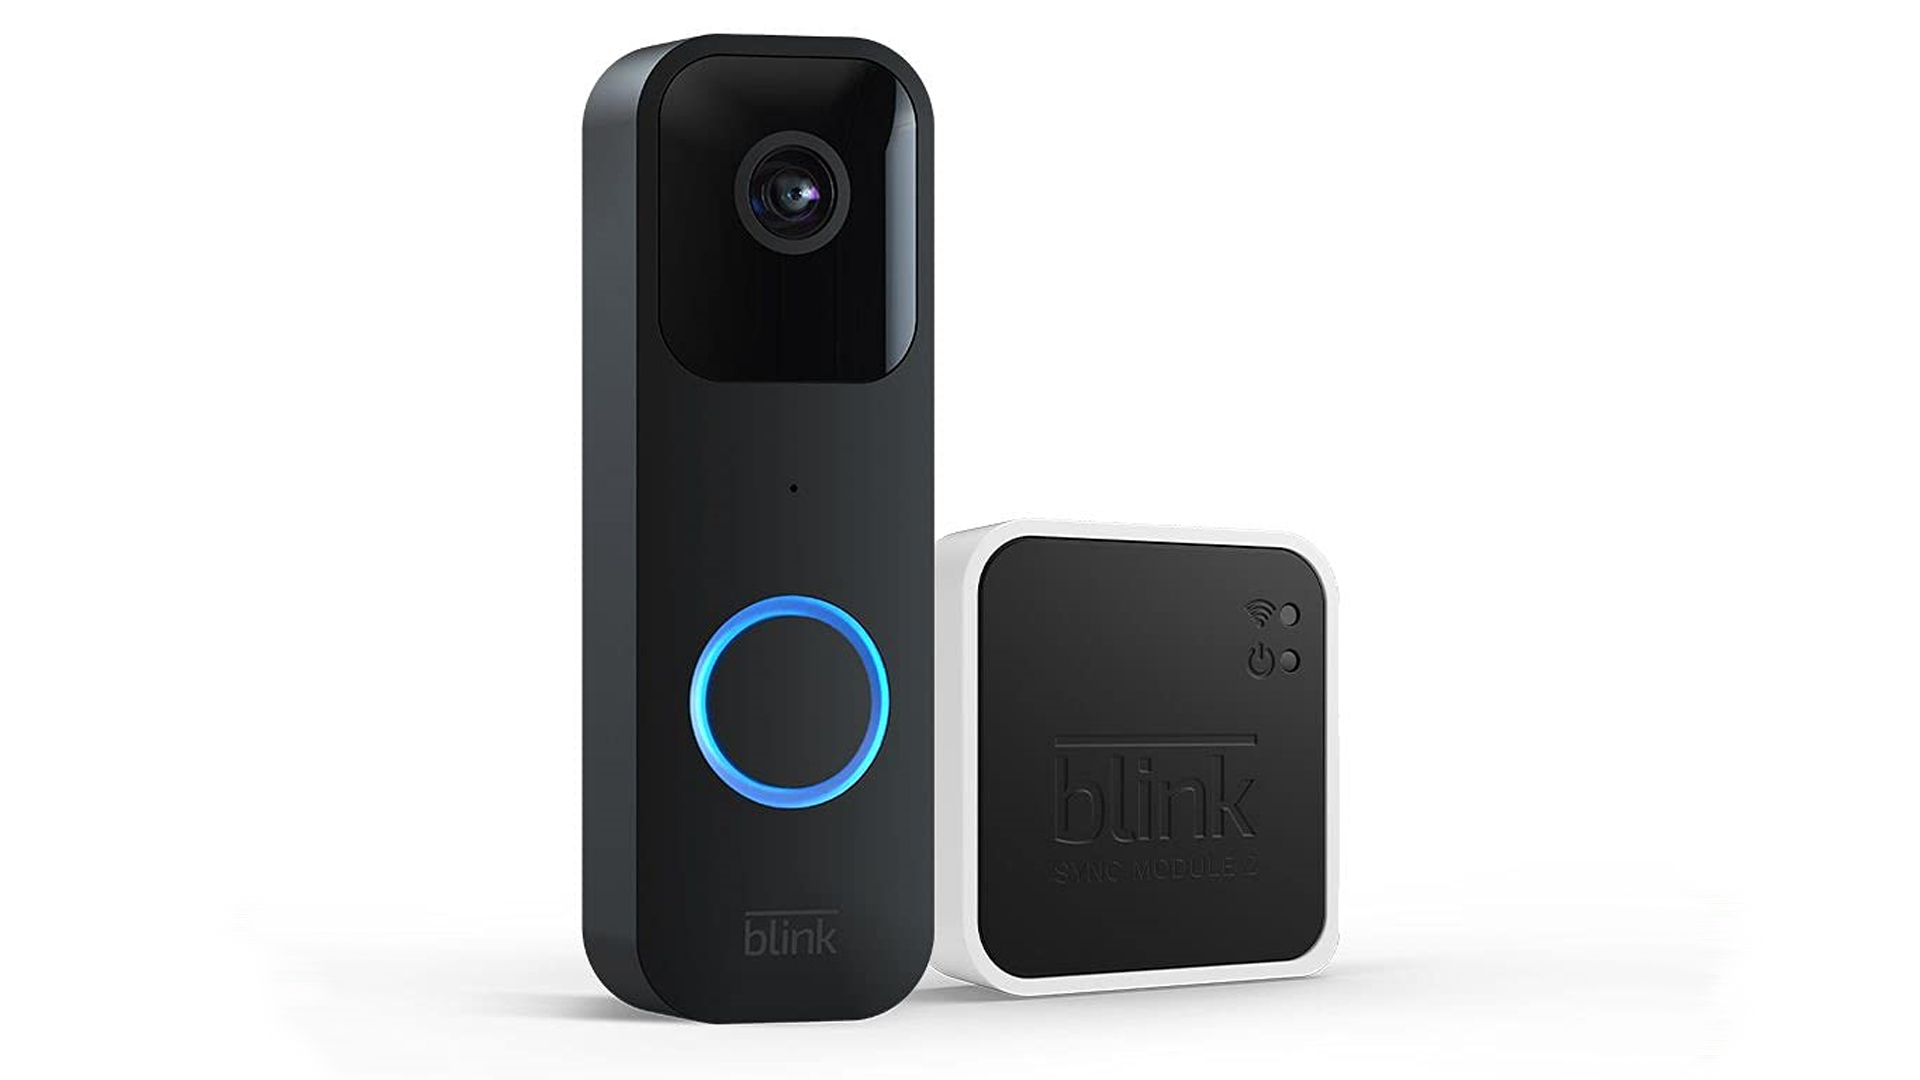 The blink video doorbell and the sync module 2